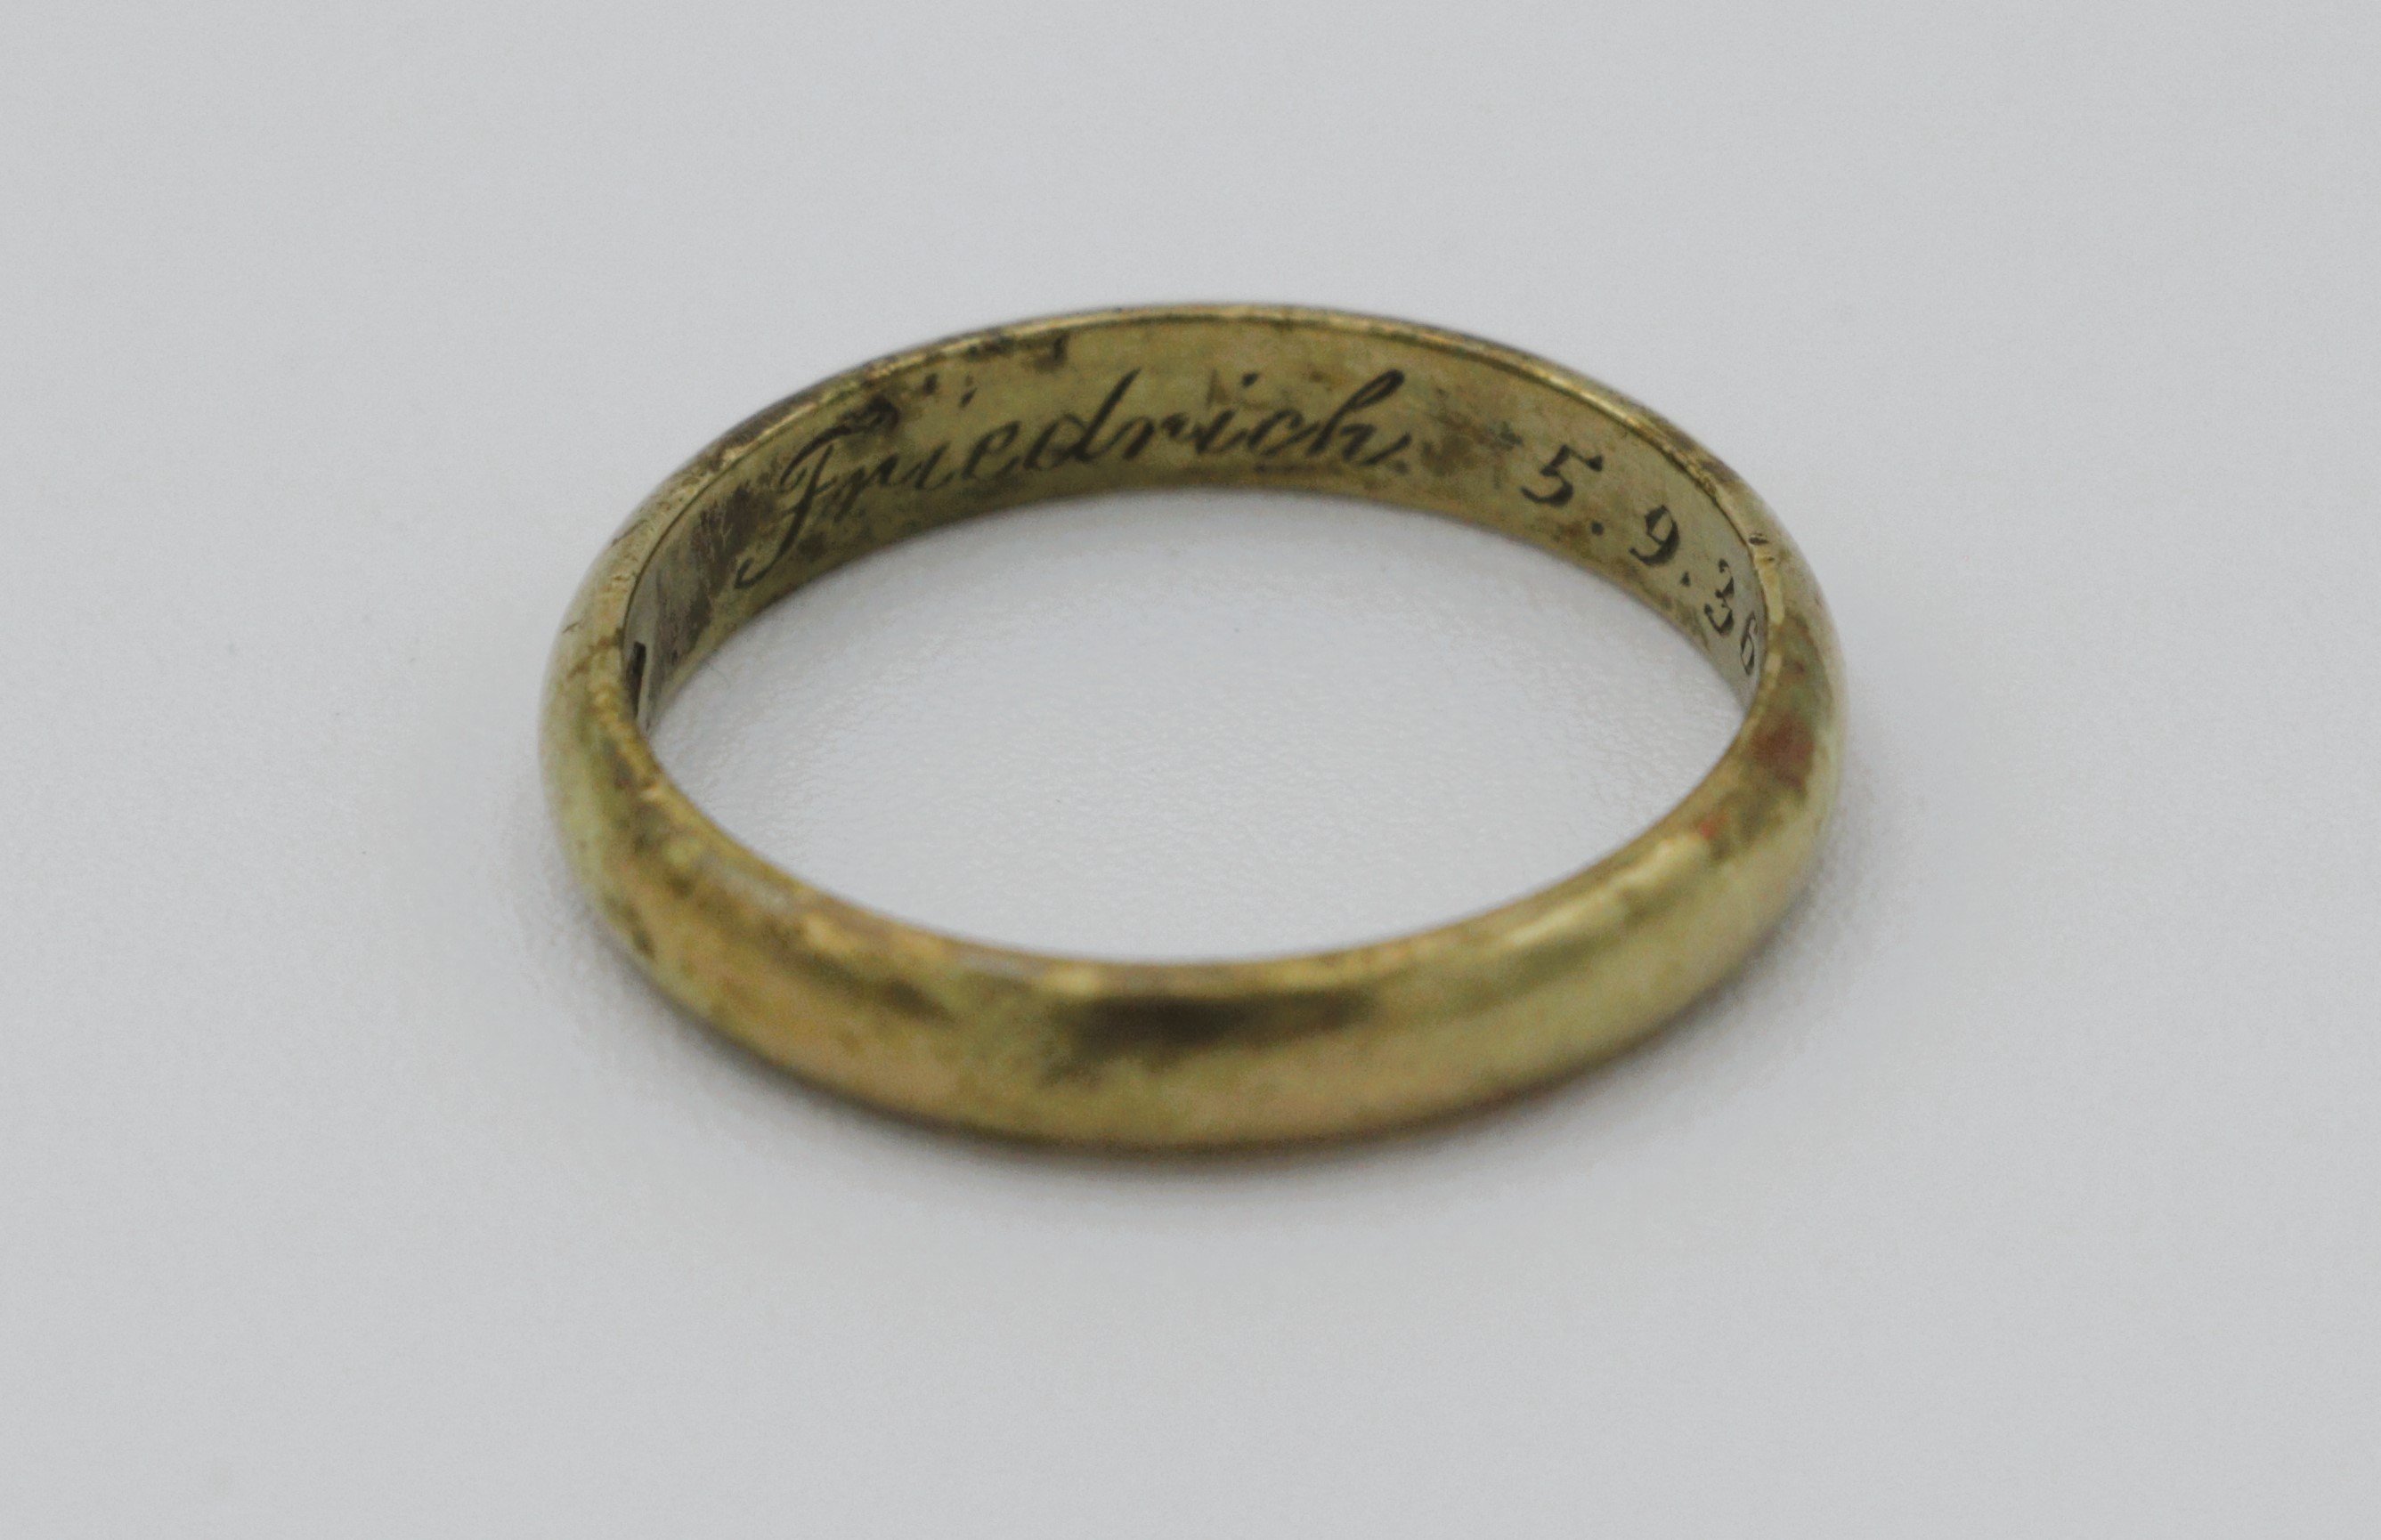 Ring mit Gravur, Sowjetunion, 1936-1938 (Museum Berlin-Karlshorst CC BY-NC-SA)